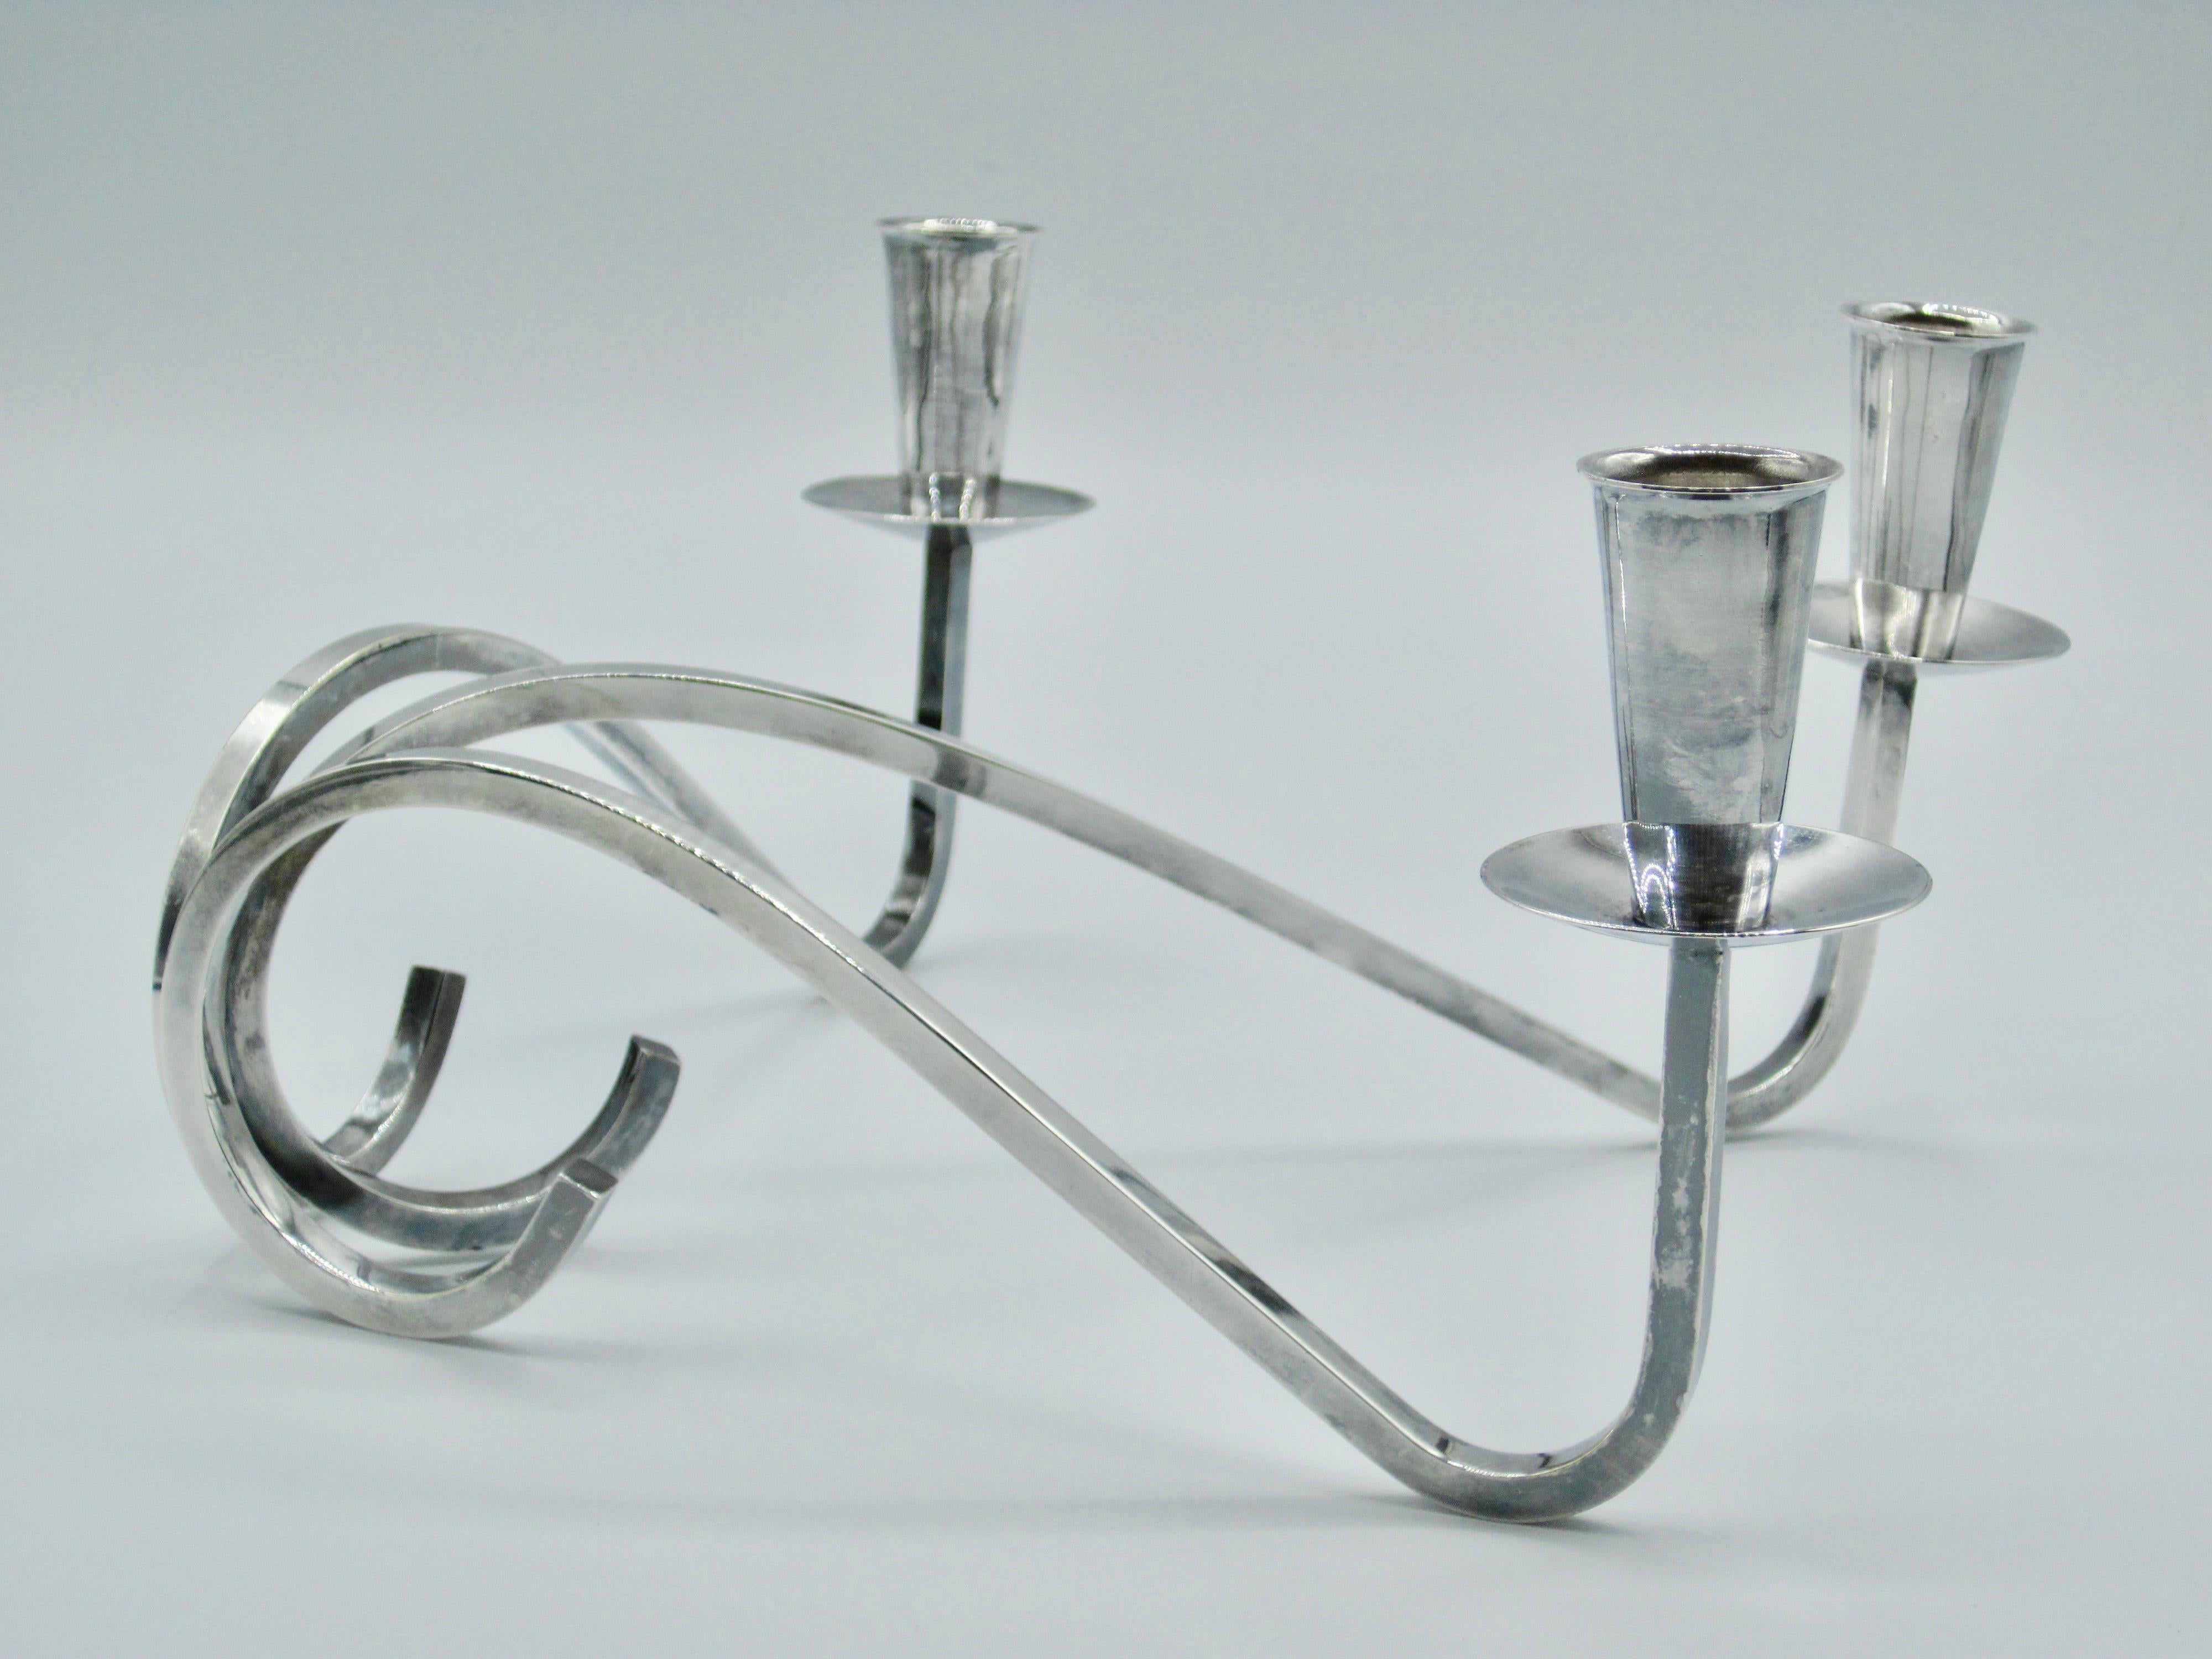 Modernist 3 Arm Curvilinear Candelabra by Fisher Silversmiths In Good Condition For Sale In Ferndale, MI